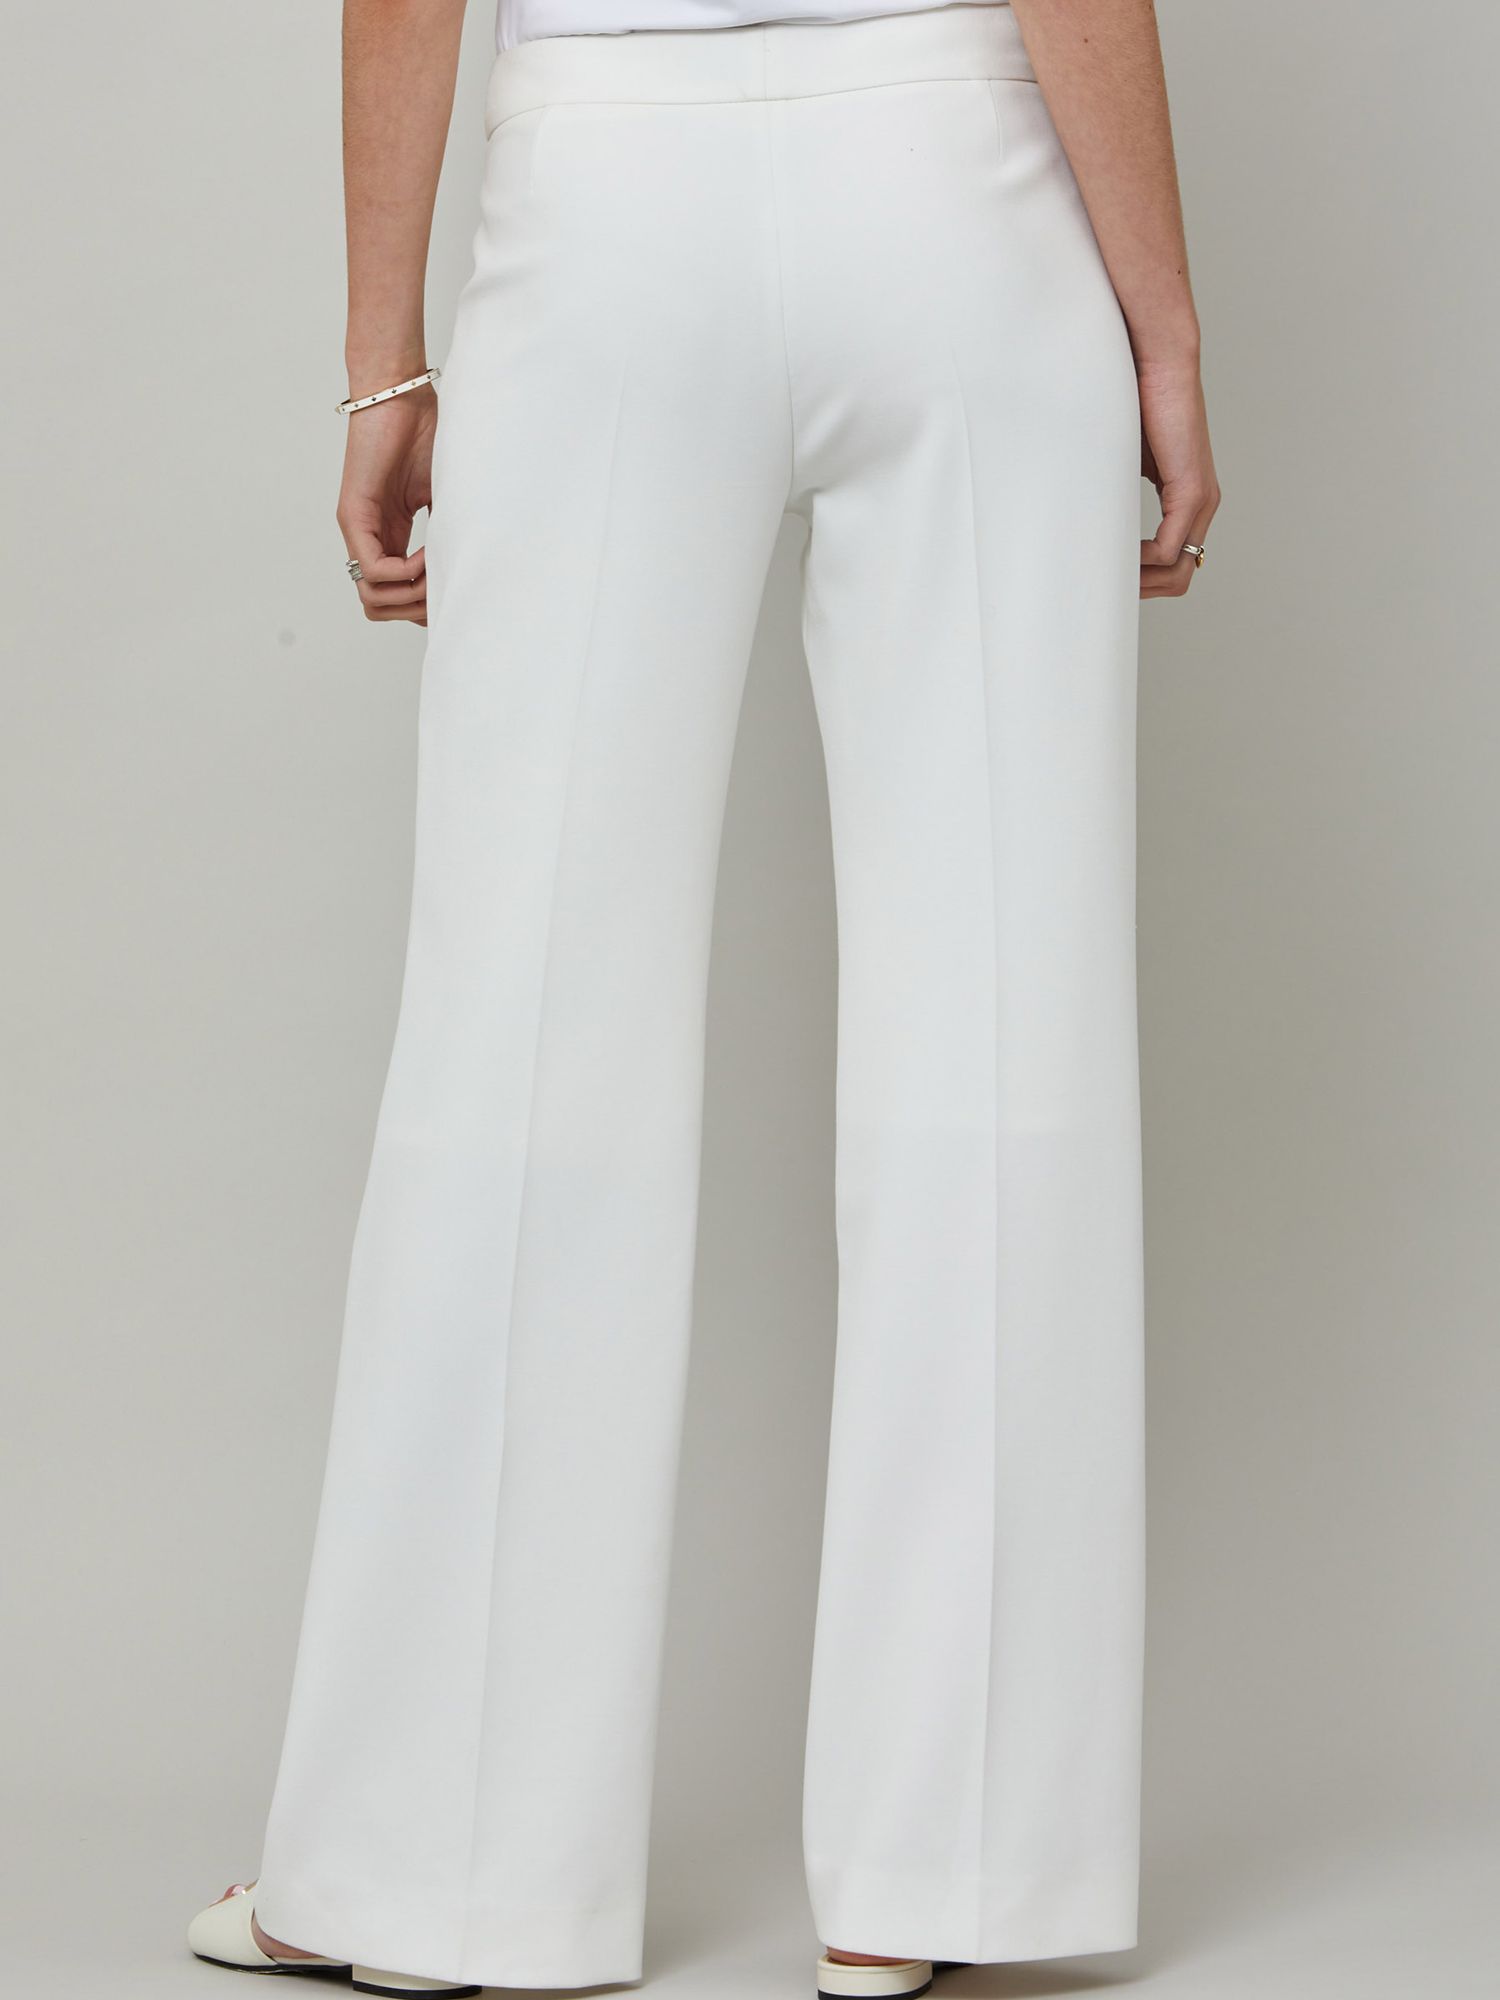 Helen McAlinden Kelly Trousers, White, 16